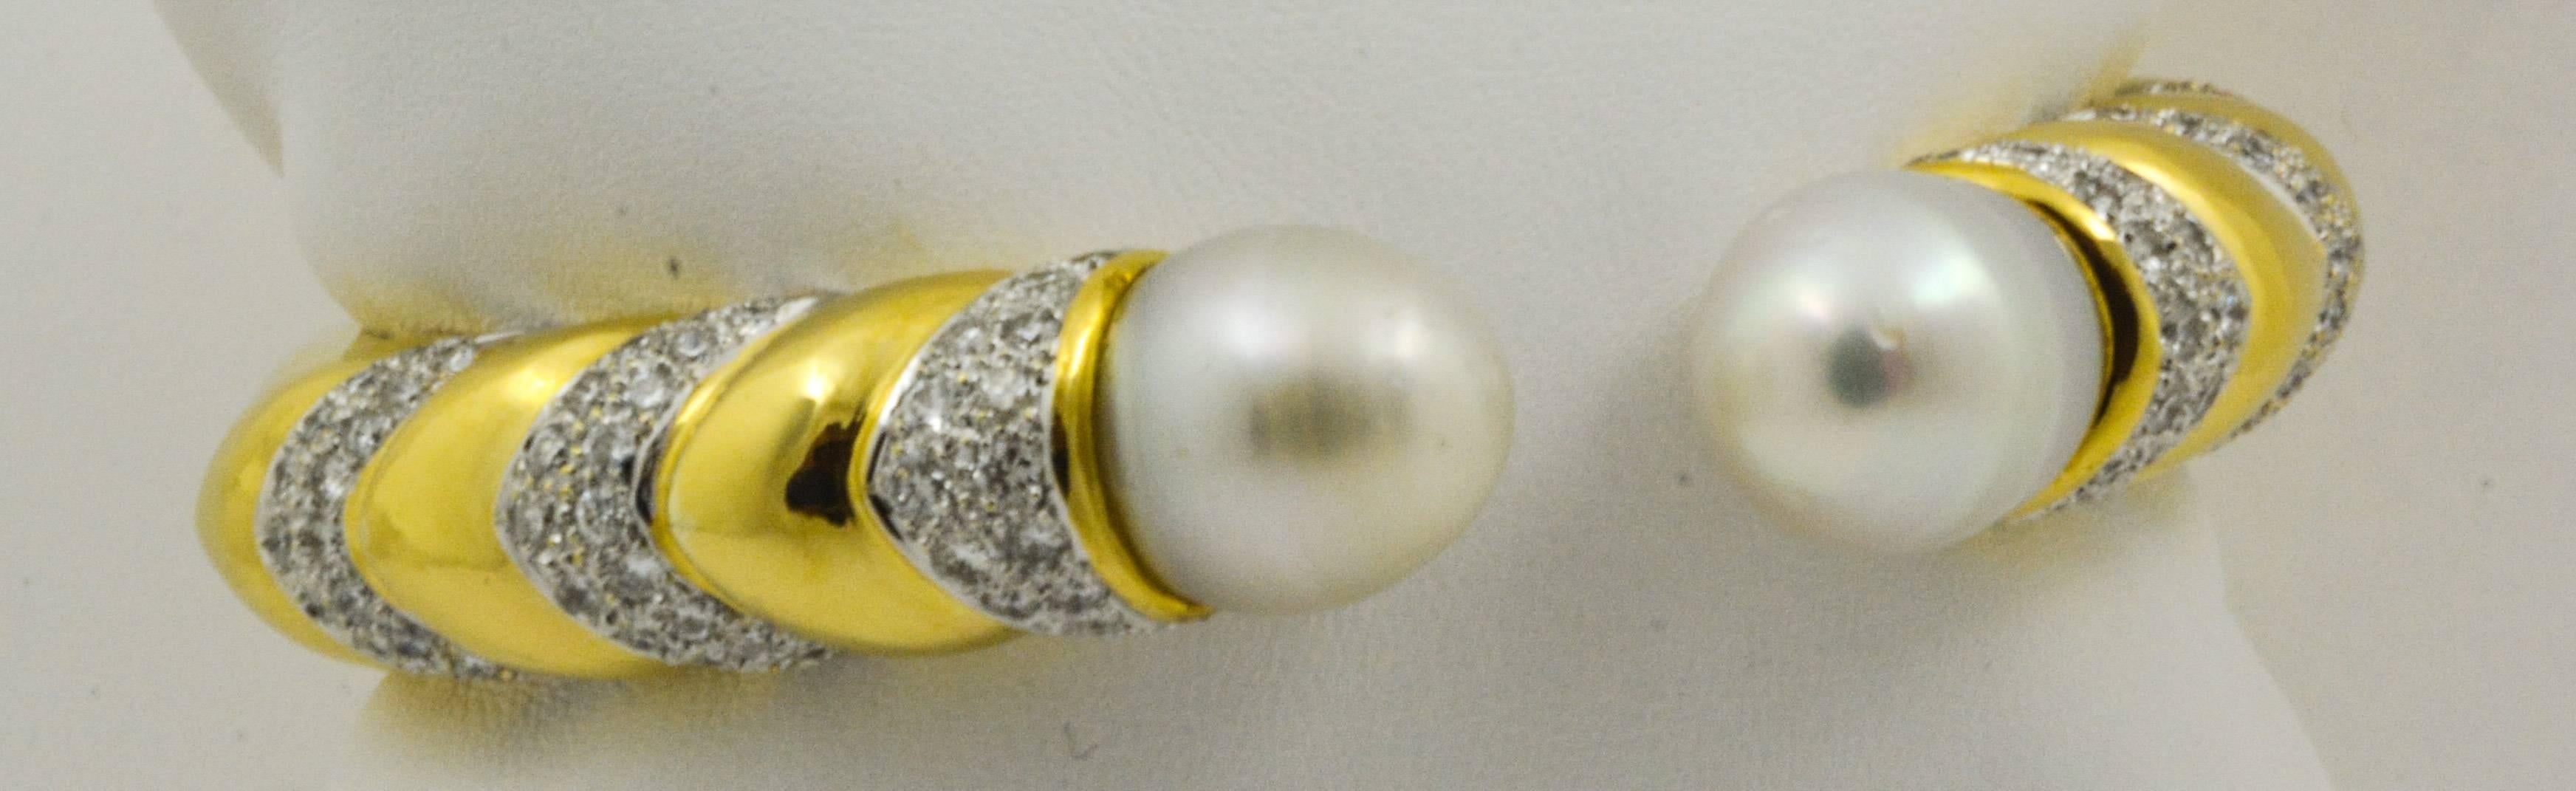 High polished 18kt yellow and white gold create a lovely, eye-catching interplay in this Baroque pearl bracelet. Two oval baroque pearls measuring 12.3x15mm cap each end of the bracelet, adding beauty and elegance to the design. Each side of the